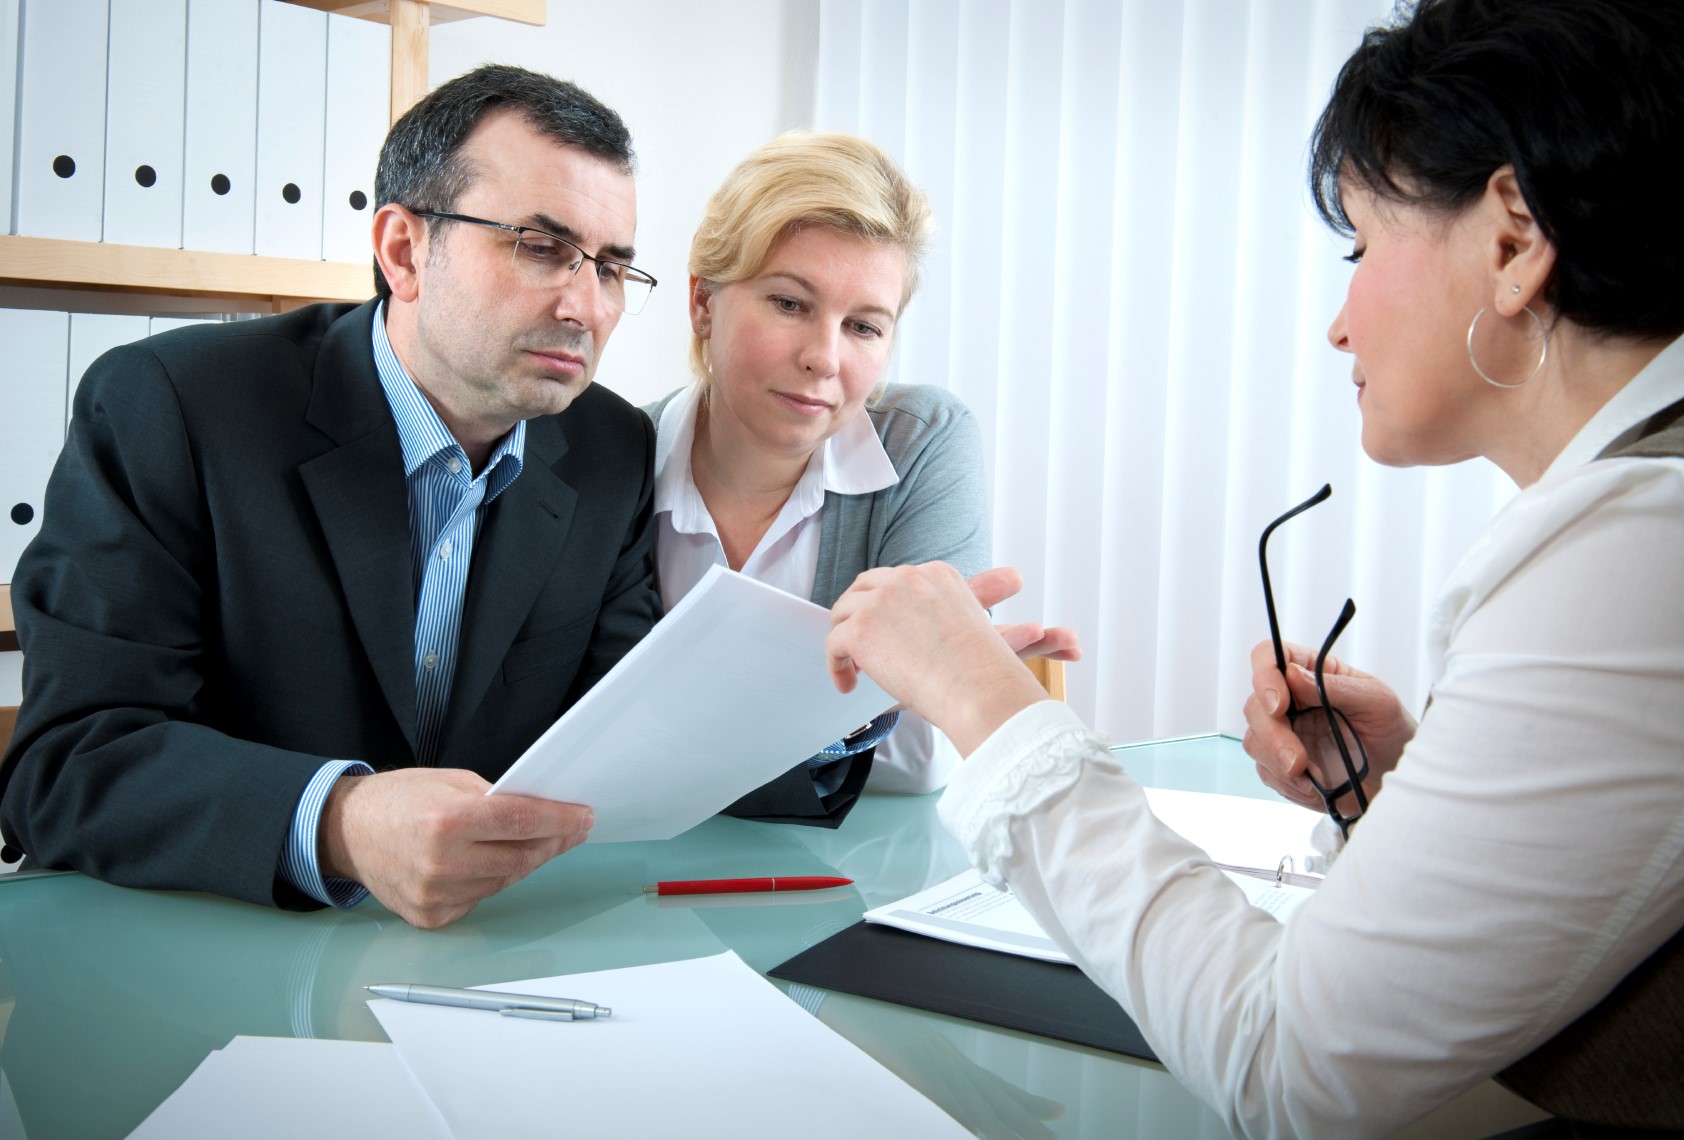 Consider Hiring a Contingency Lawyer Quoting a Reasonable Percentage as Legal Fee